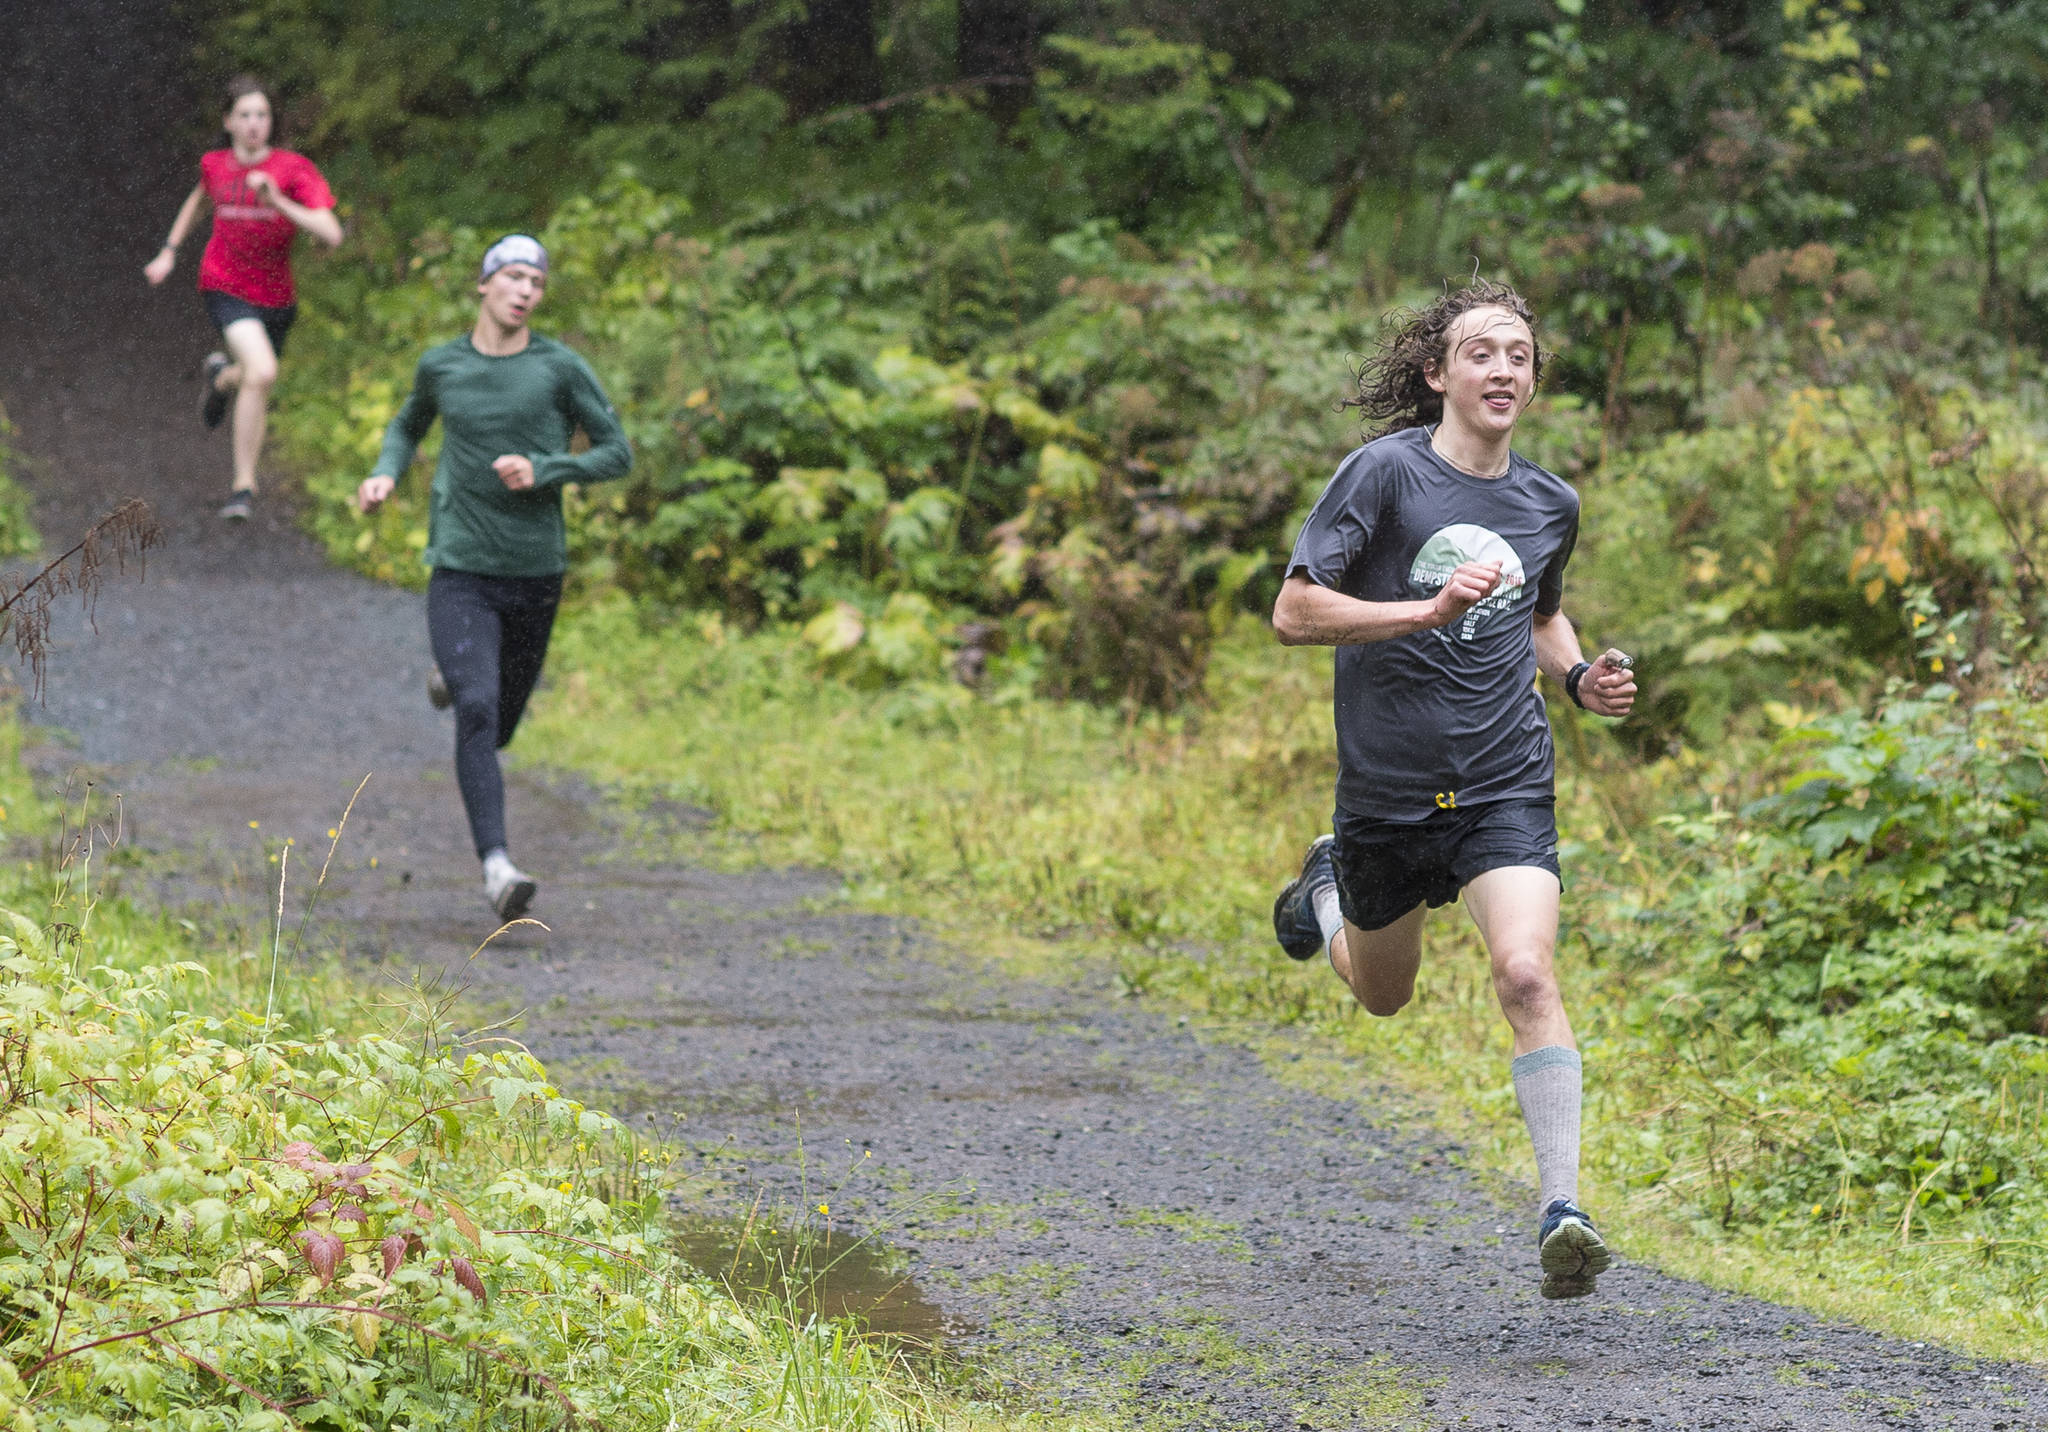 Senior Arne Ellefson-Carnes, right, leads JDHS graduate Zack Bursell, center, and sophomore Finn Morley down a hill during Juneau-Douglas High School cross country practice at Sandy Beach at the Treadwell Historic Mining Area on Tuesday. (Michael Penn | Juneau Empire)